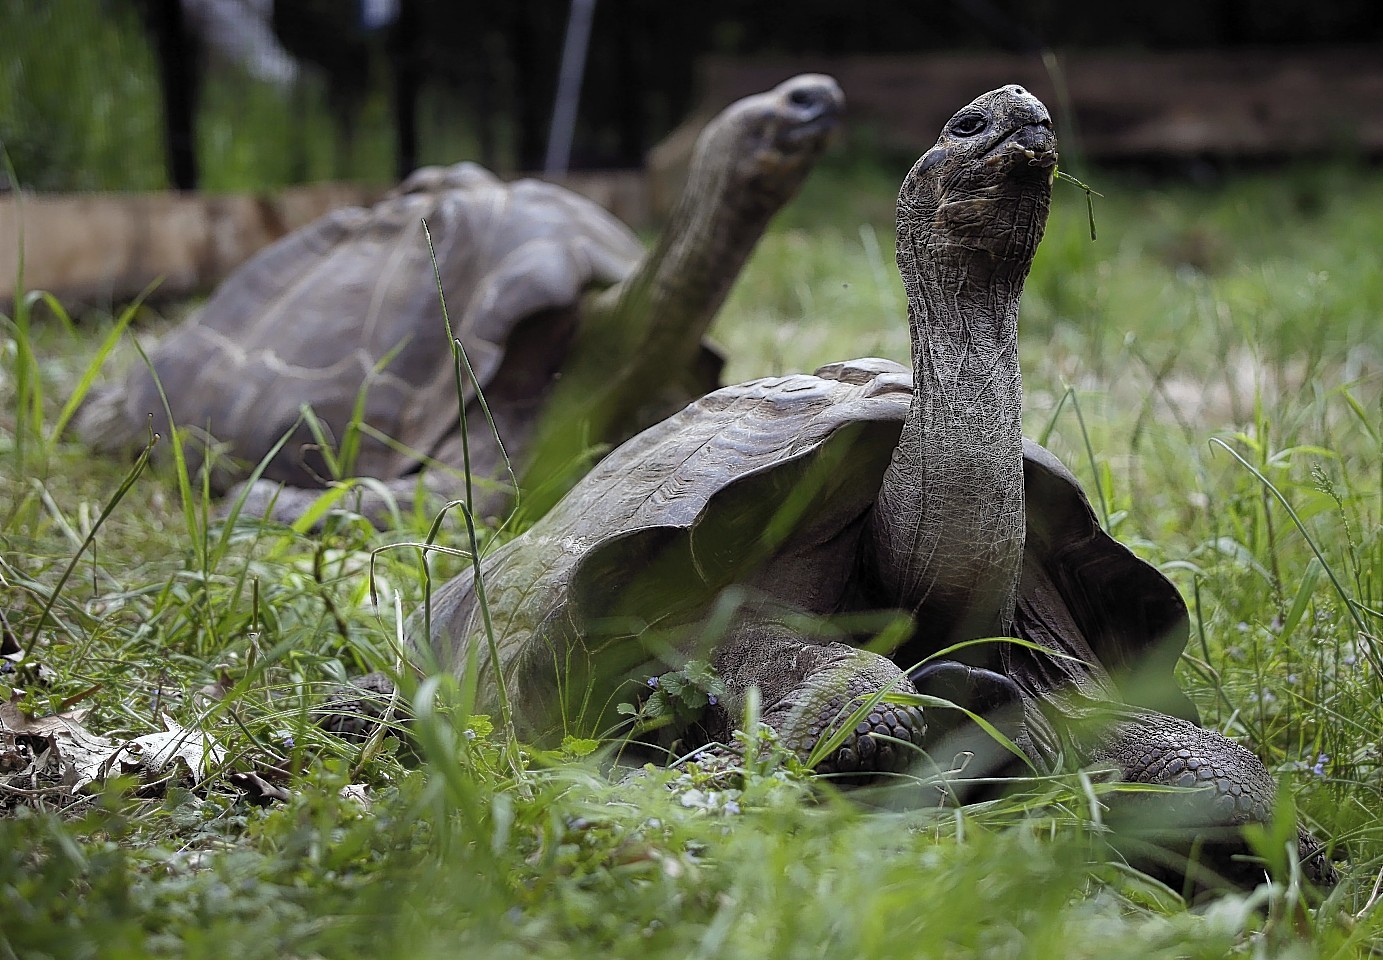 A pair of 20-year-old Galápagos tortoises raise their heads as they wander through their new home at The Pittsburgh Zoo & PPG Aquarium on Thursday